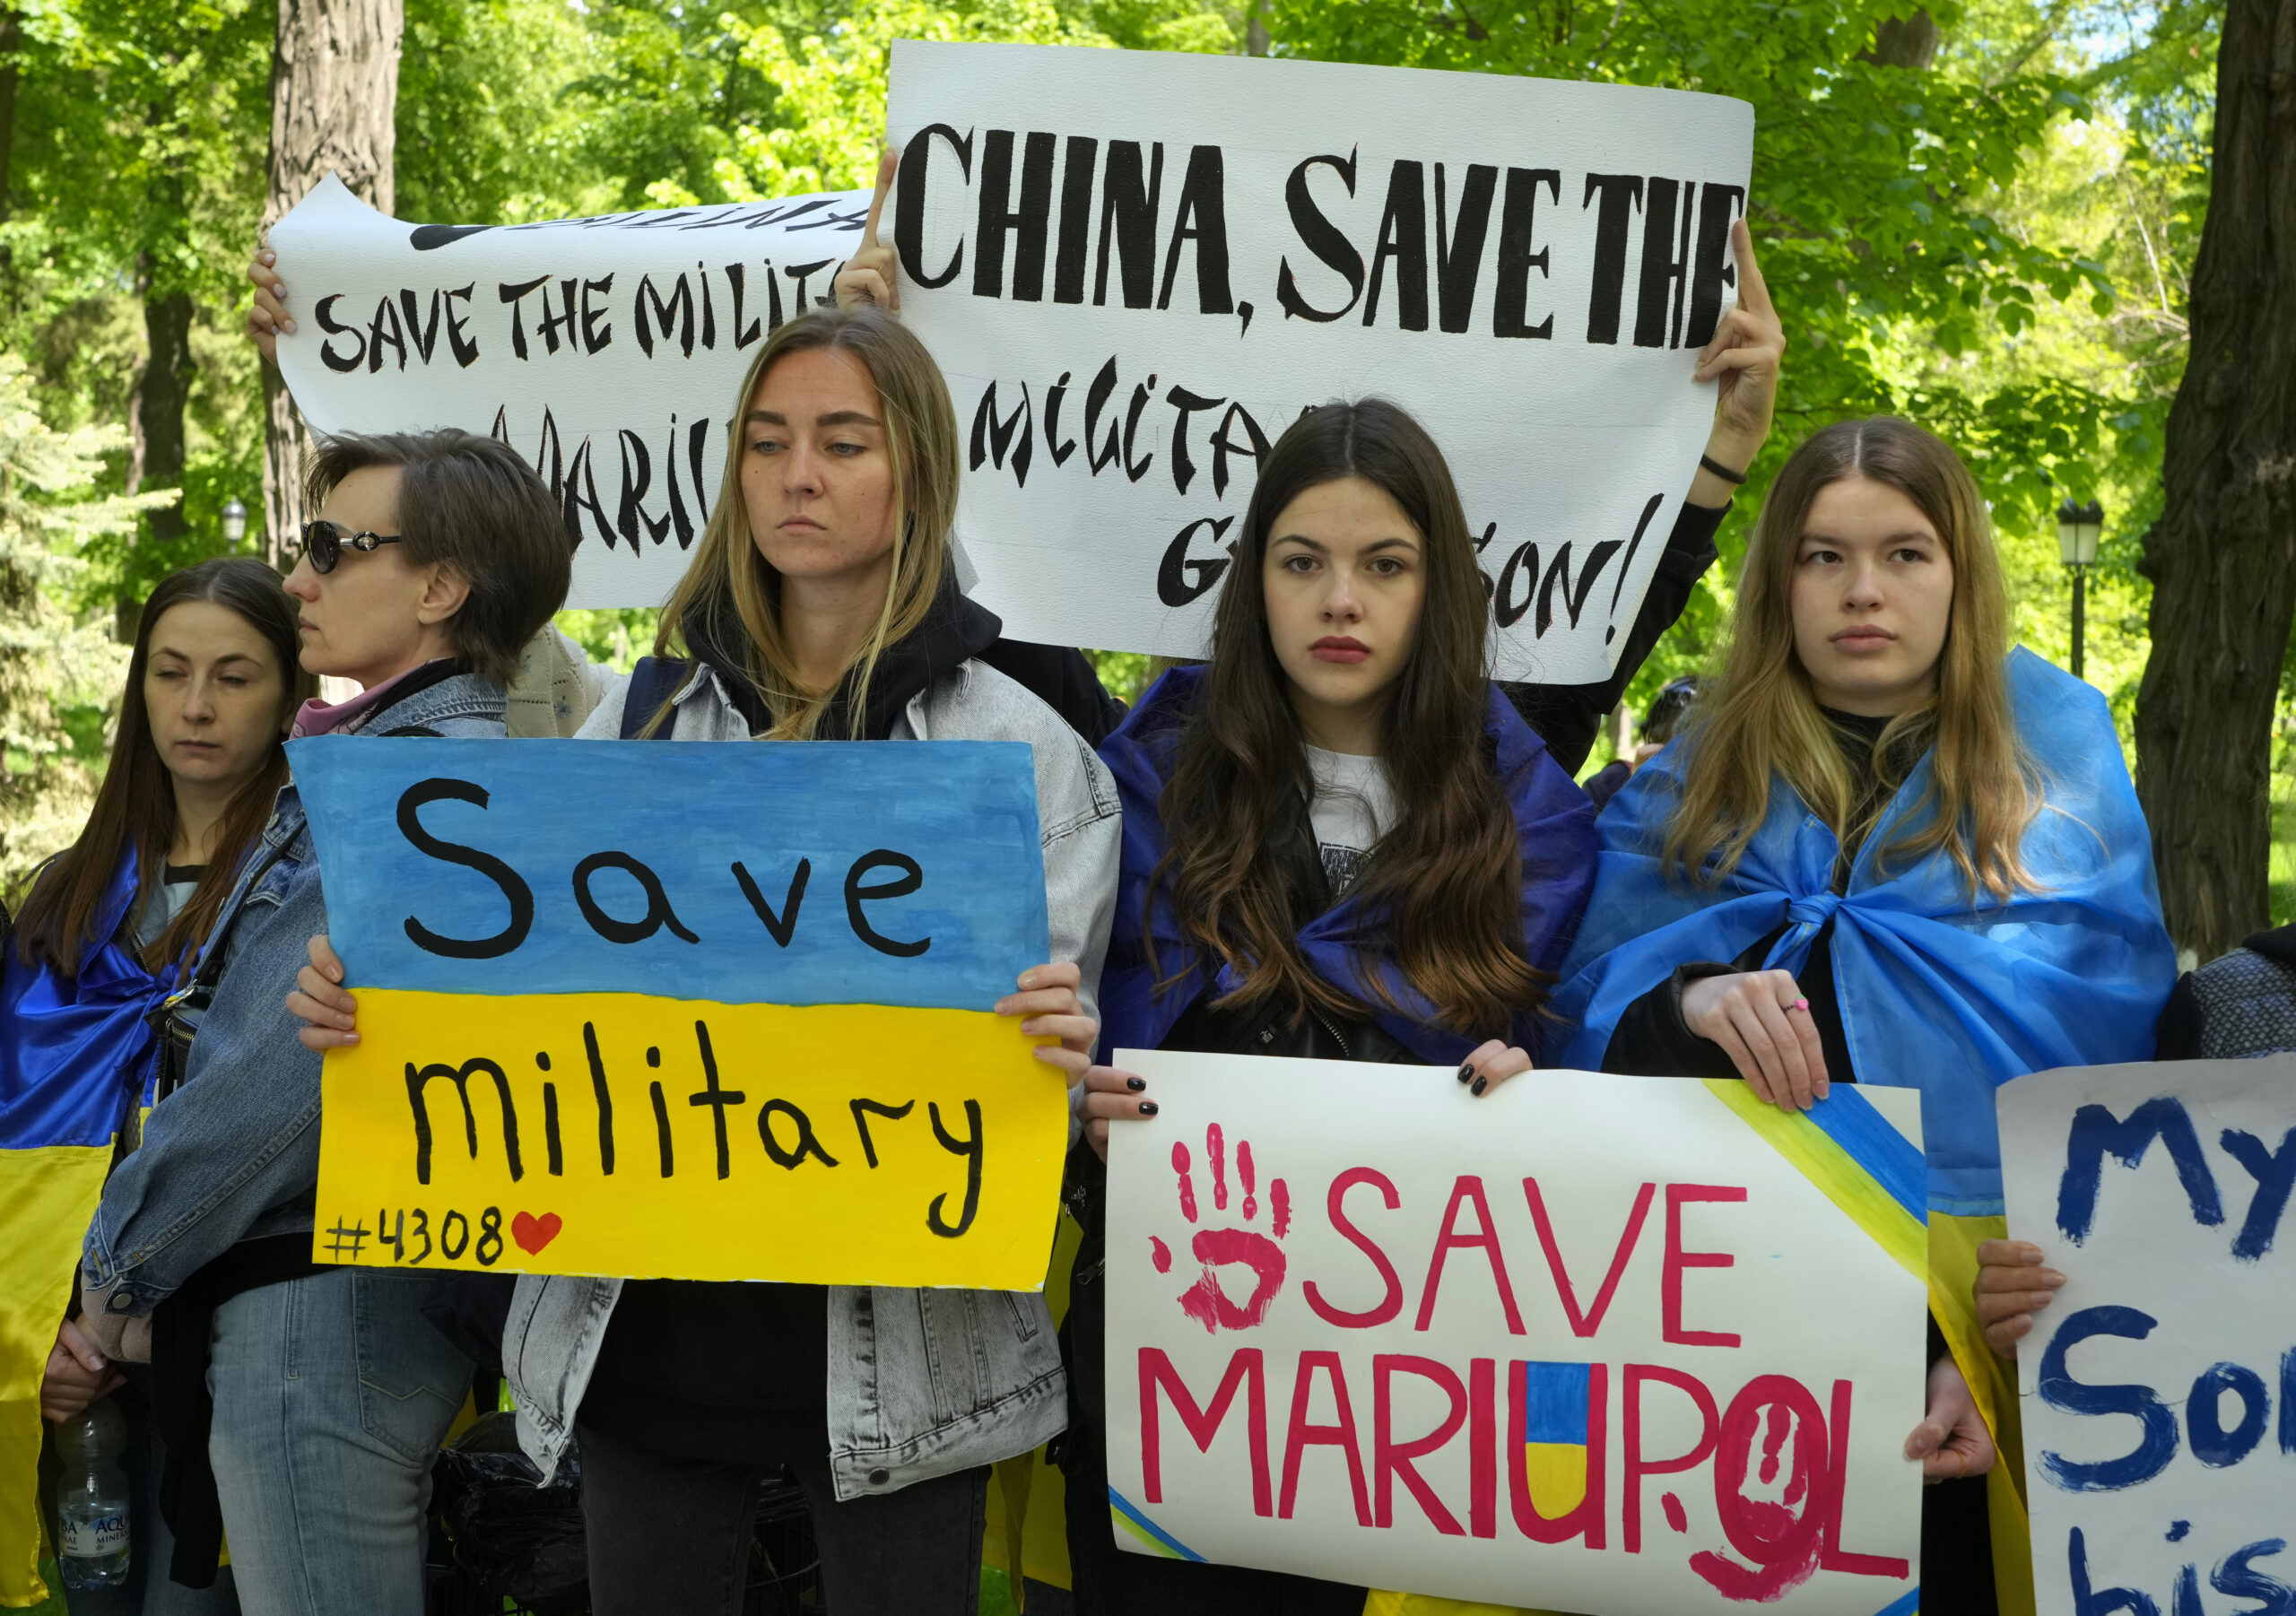 Ukrainian women picket in front of the Chinese embassy in Kyiv, Ukraine, Tuesday, May 17, 2022. Wives and mothers of the defenders of Mariupol call on Turkish President Recep Tayyip Erdogan and Chinese President Xi Jinping to save Ukrainian fighters from the besieged city of Mariupol amid Russia's war. (AP Photo/Efrem Lukatsky)